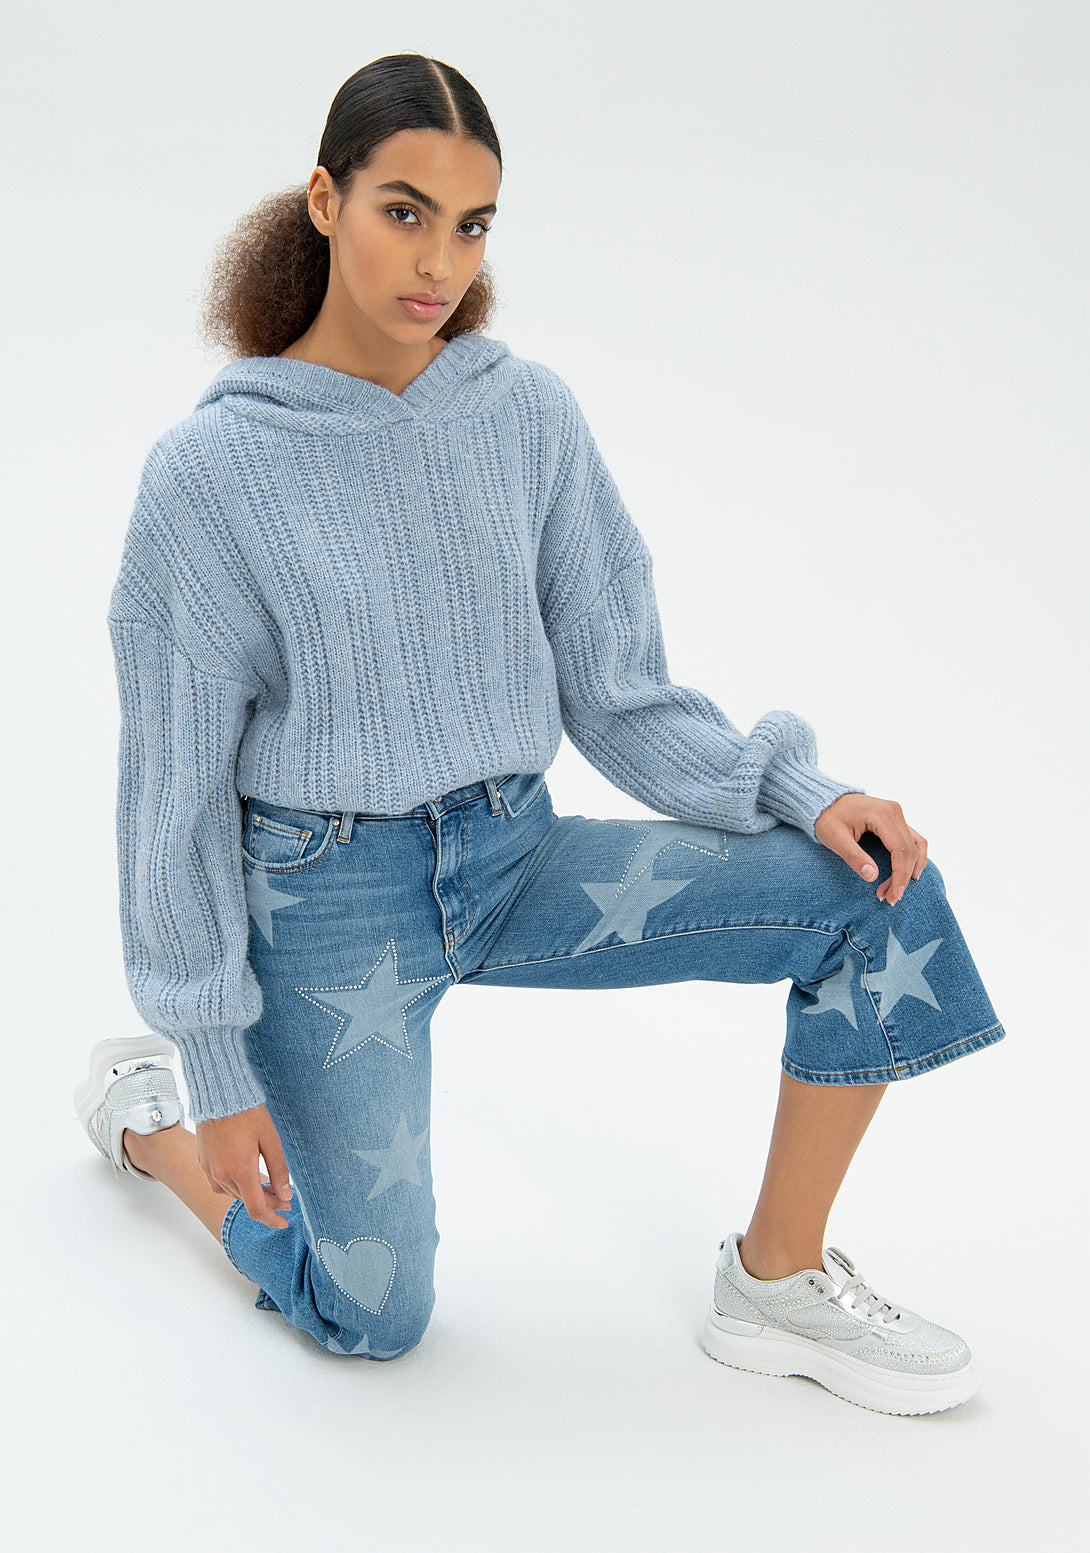 Jeans flare cropped made in denim with symbols pattern Fracomina FP22WV9006D41893-349-3